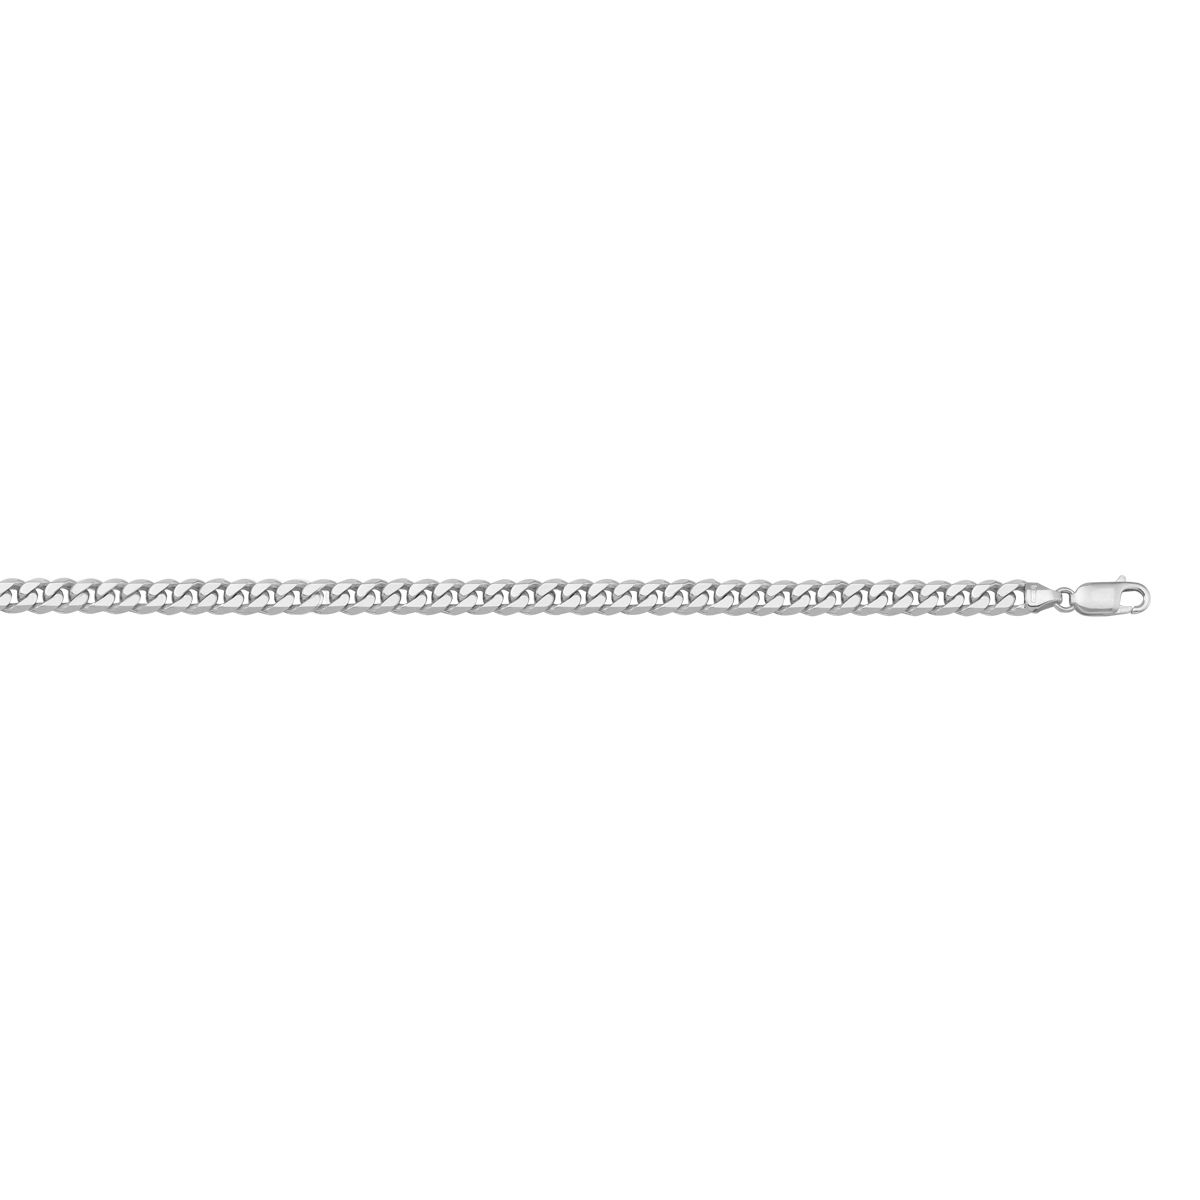 CCRB02, Gold Chain, Flat Beveled Curb, White Gold